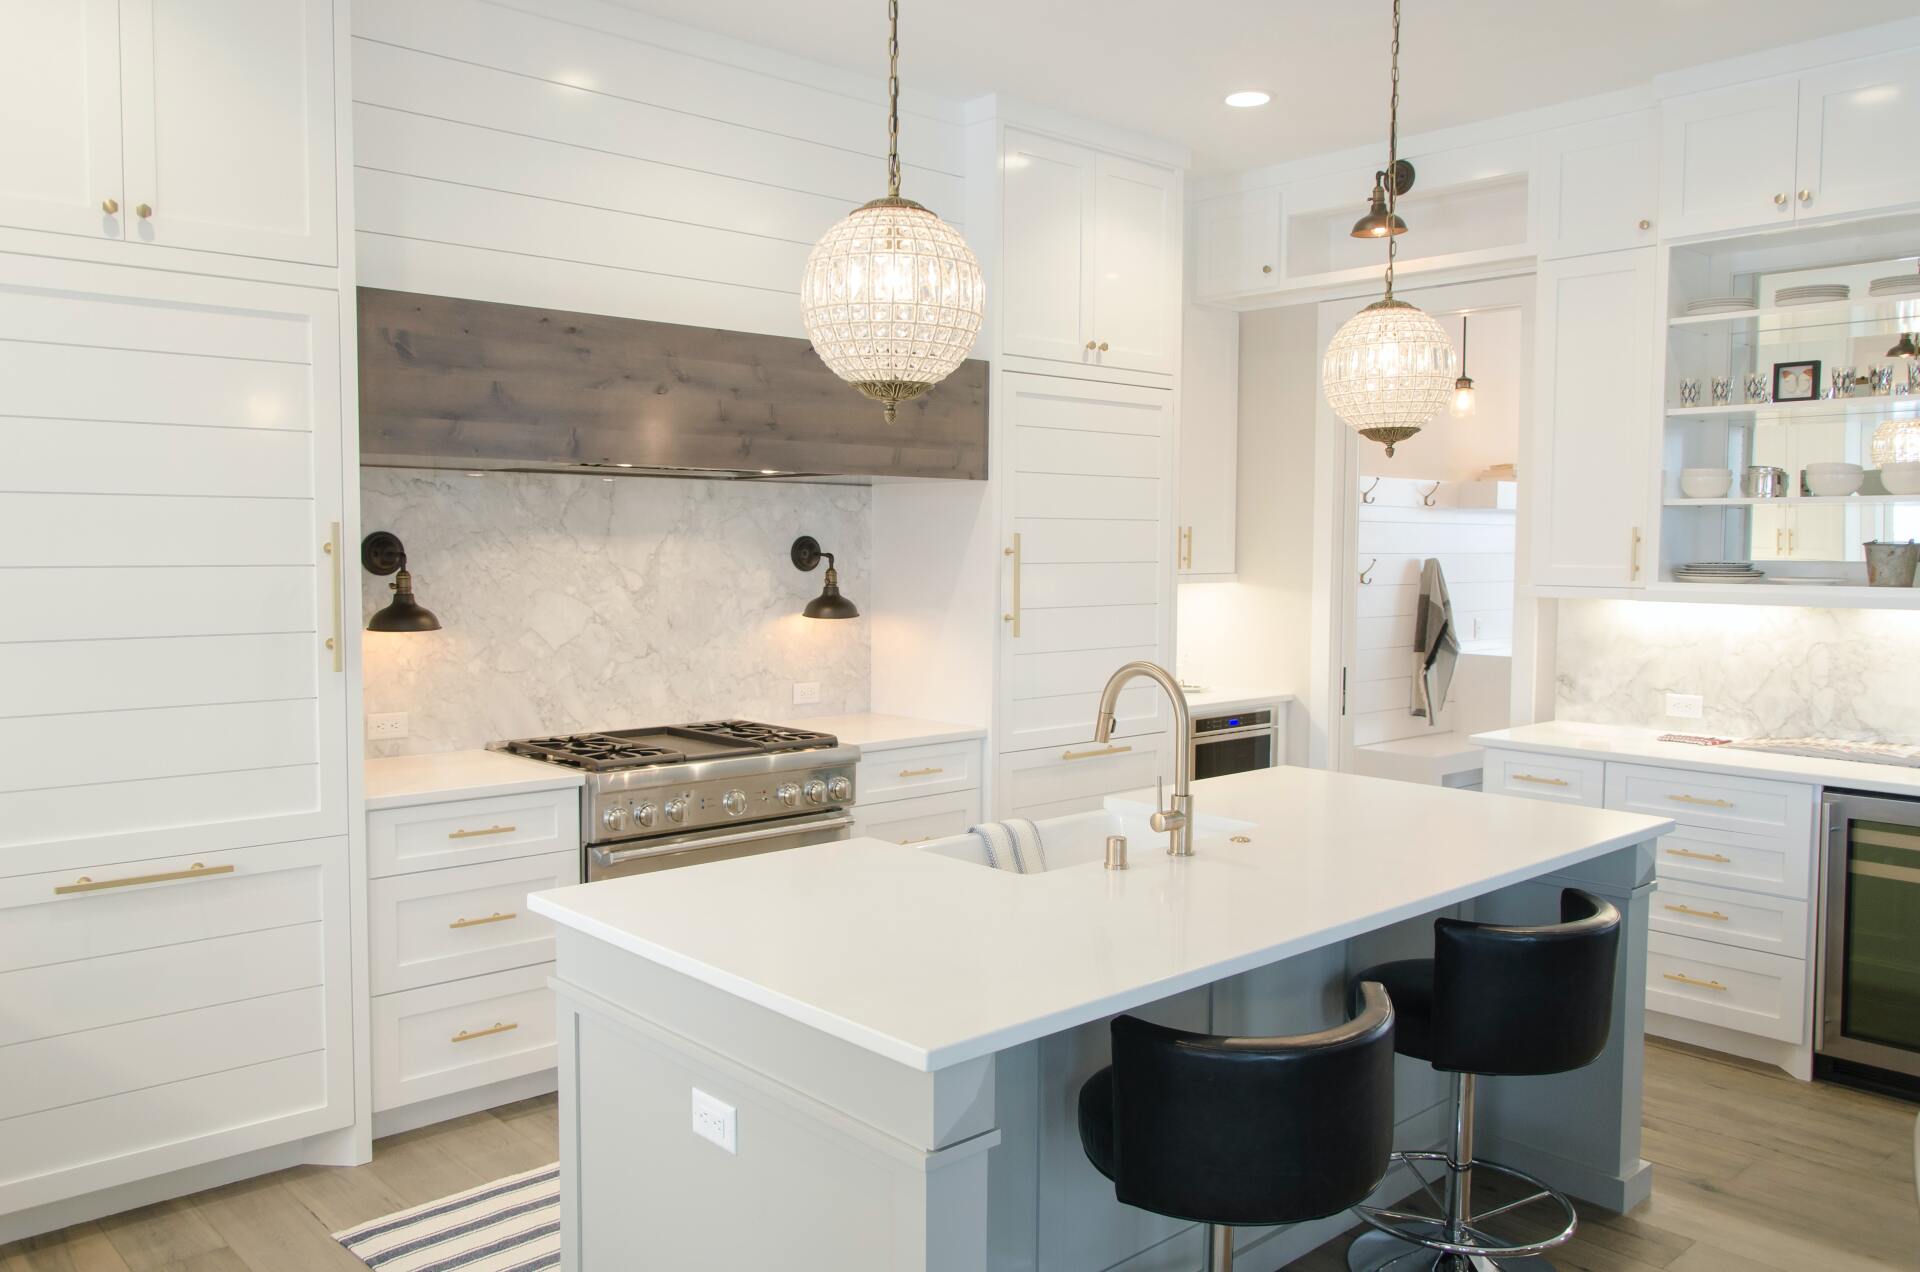 Well-designed white kitchen with stainless steel appliances.